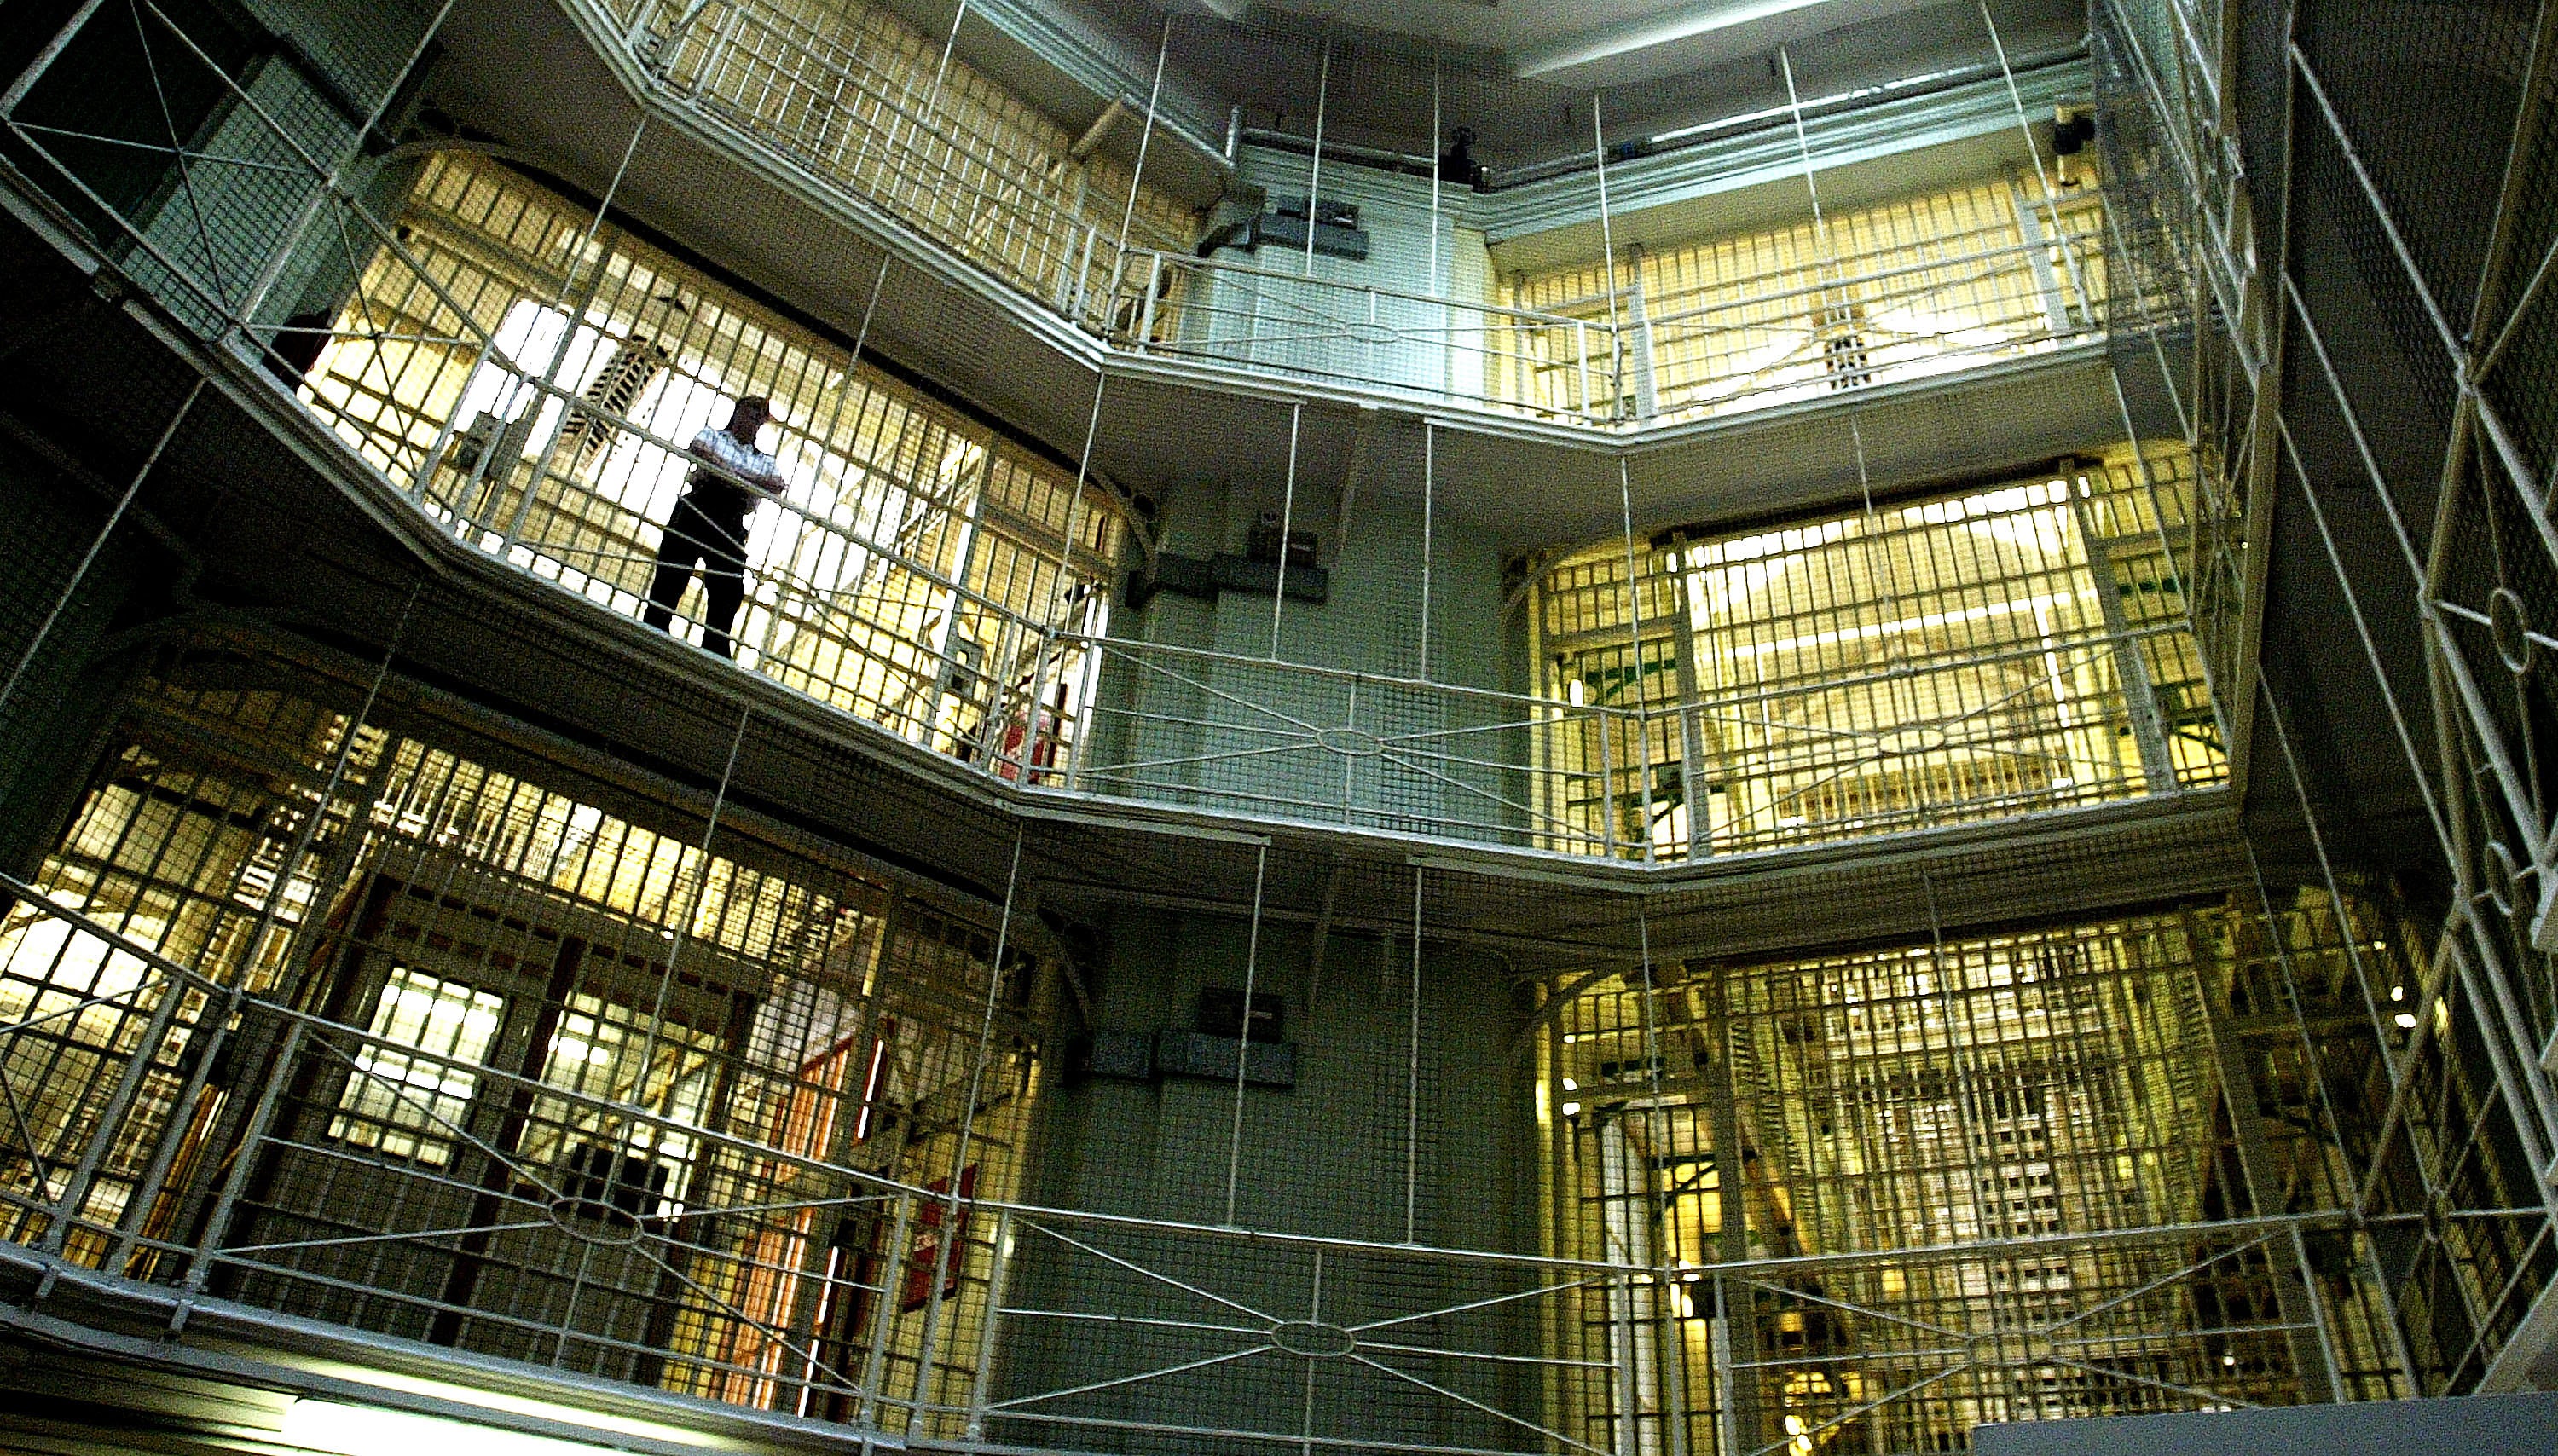 Labour said the government needed to ‘urgently address’ the challenges facing prison staff